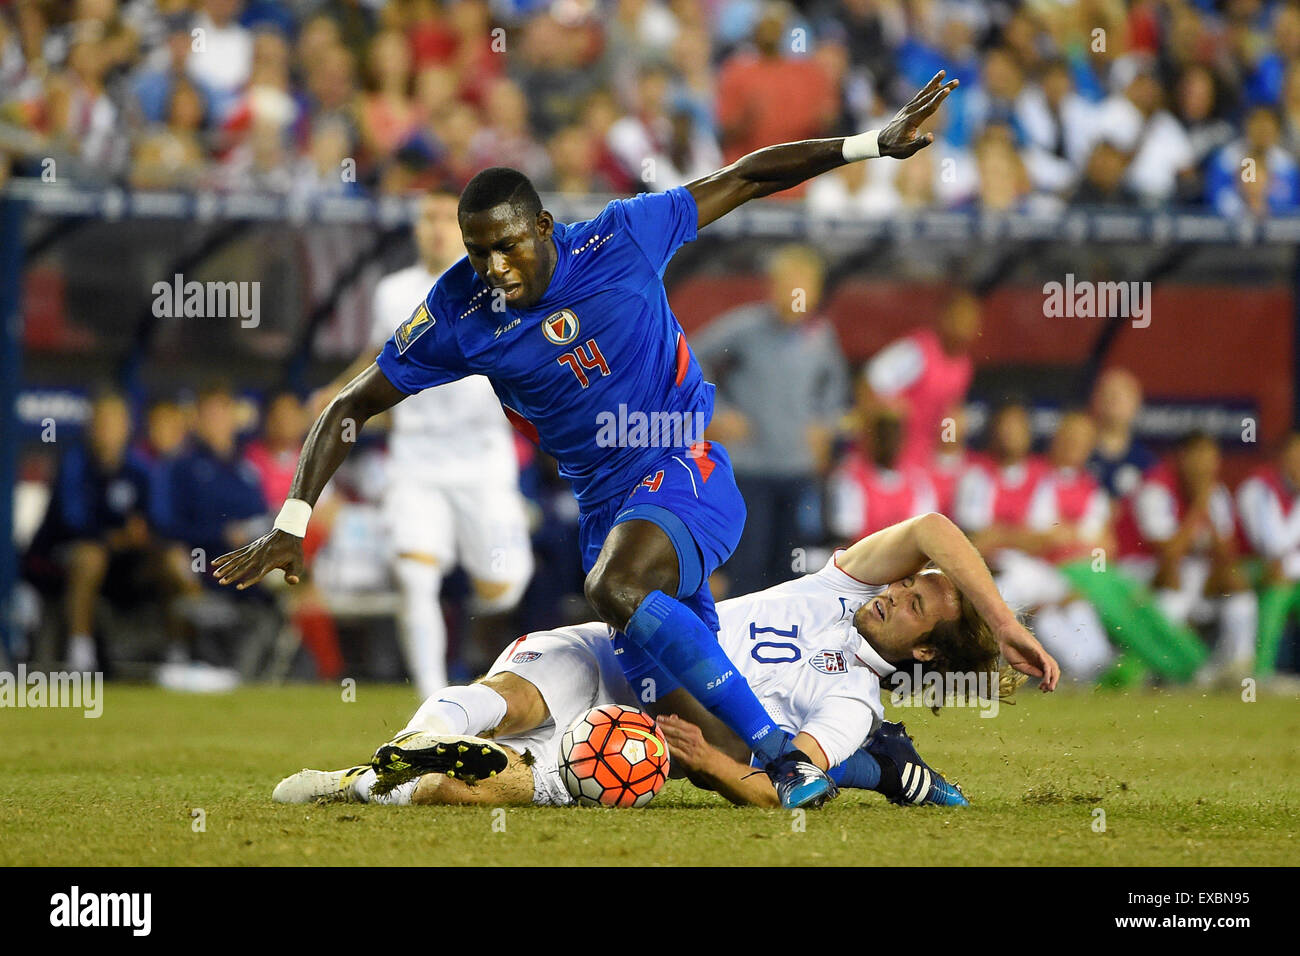 Foxborough, Massachusetts, USA. 10th July, 2015. United States midfielder Mix Diskerud (10) collides with United States midfielder Greg Garza (14) on the pitch during the CONCACAF Gold Cup group stage match between USA and Haiti held at Gillette Stadium, in Foxborough Massachusetts. USA defeated Haiti 1-0. Eric Canha/CSM/Alamy Live News/ Alamy Live News Stock Photo